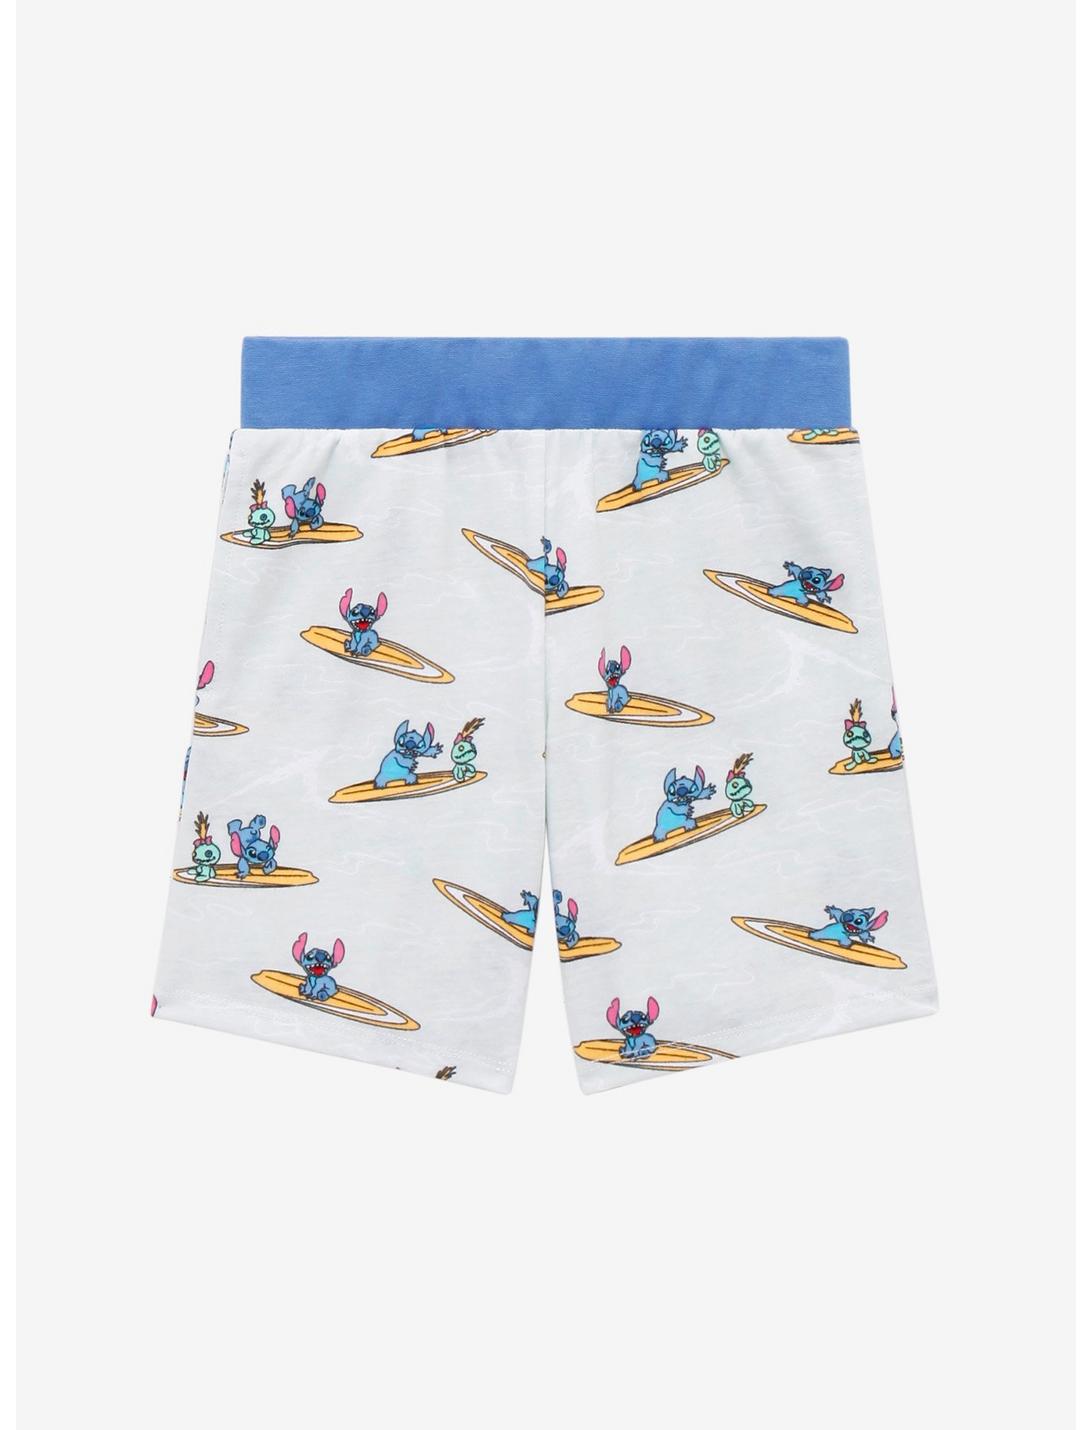 Disney Lilo & Stitch Surfing with Stitch & Scrump Toddler Shorts - BoxLunch Exclusive, LIGHT BLUE, hi-res